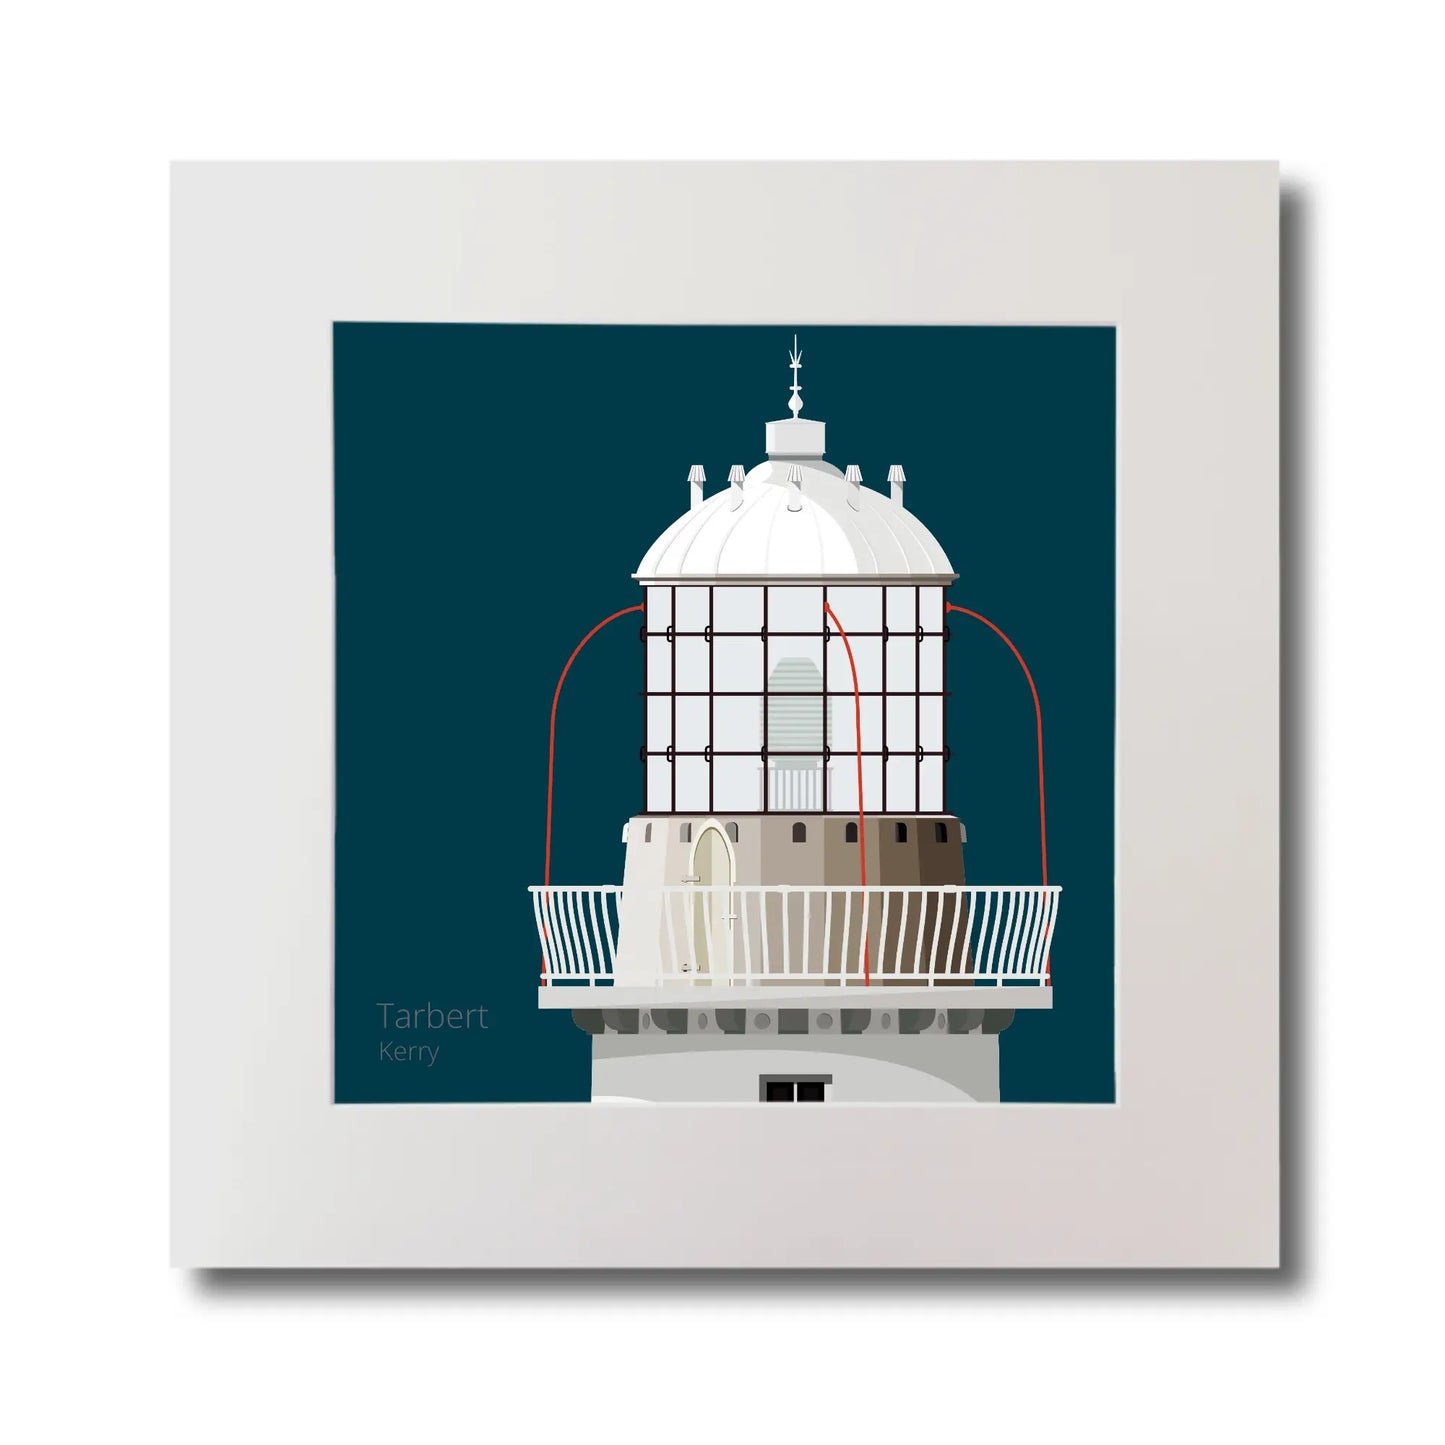 Illustration Tarbert lighthouse on a midnight blue background, mounted and measuring 30x30cm.